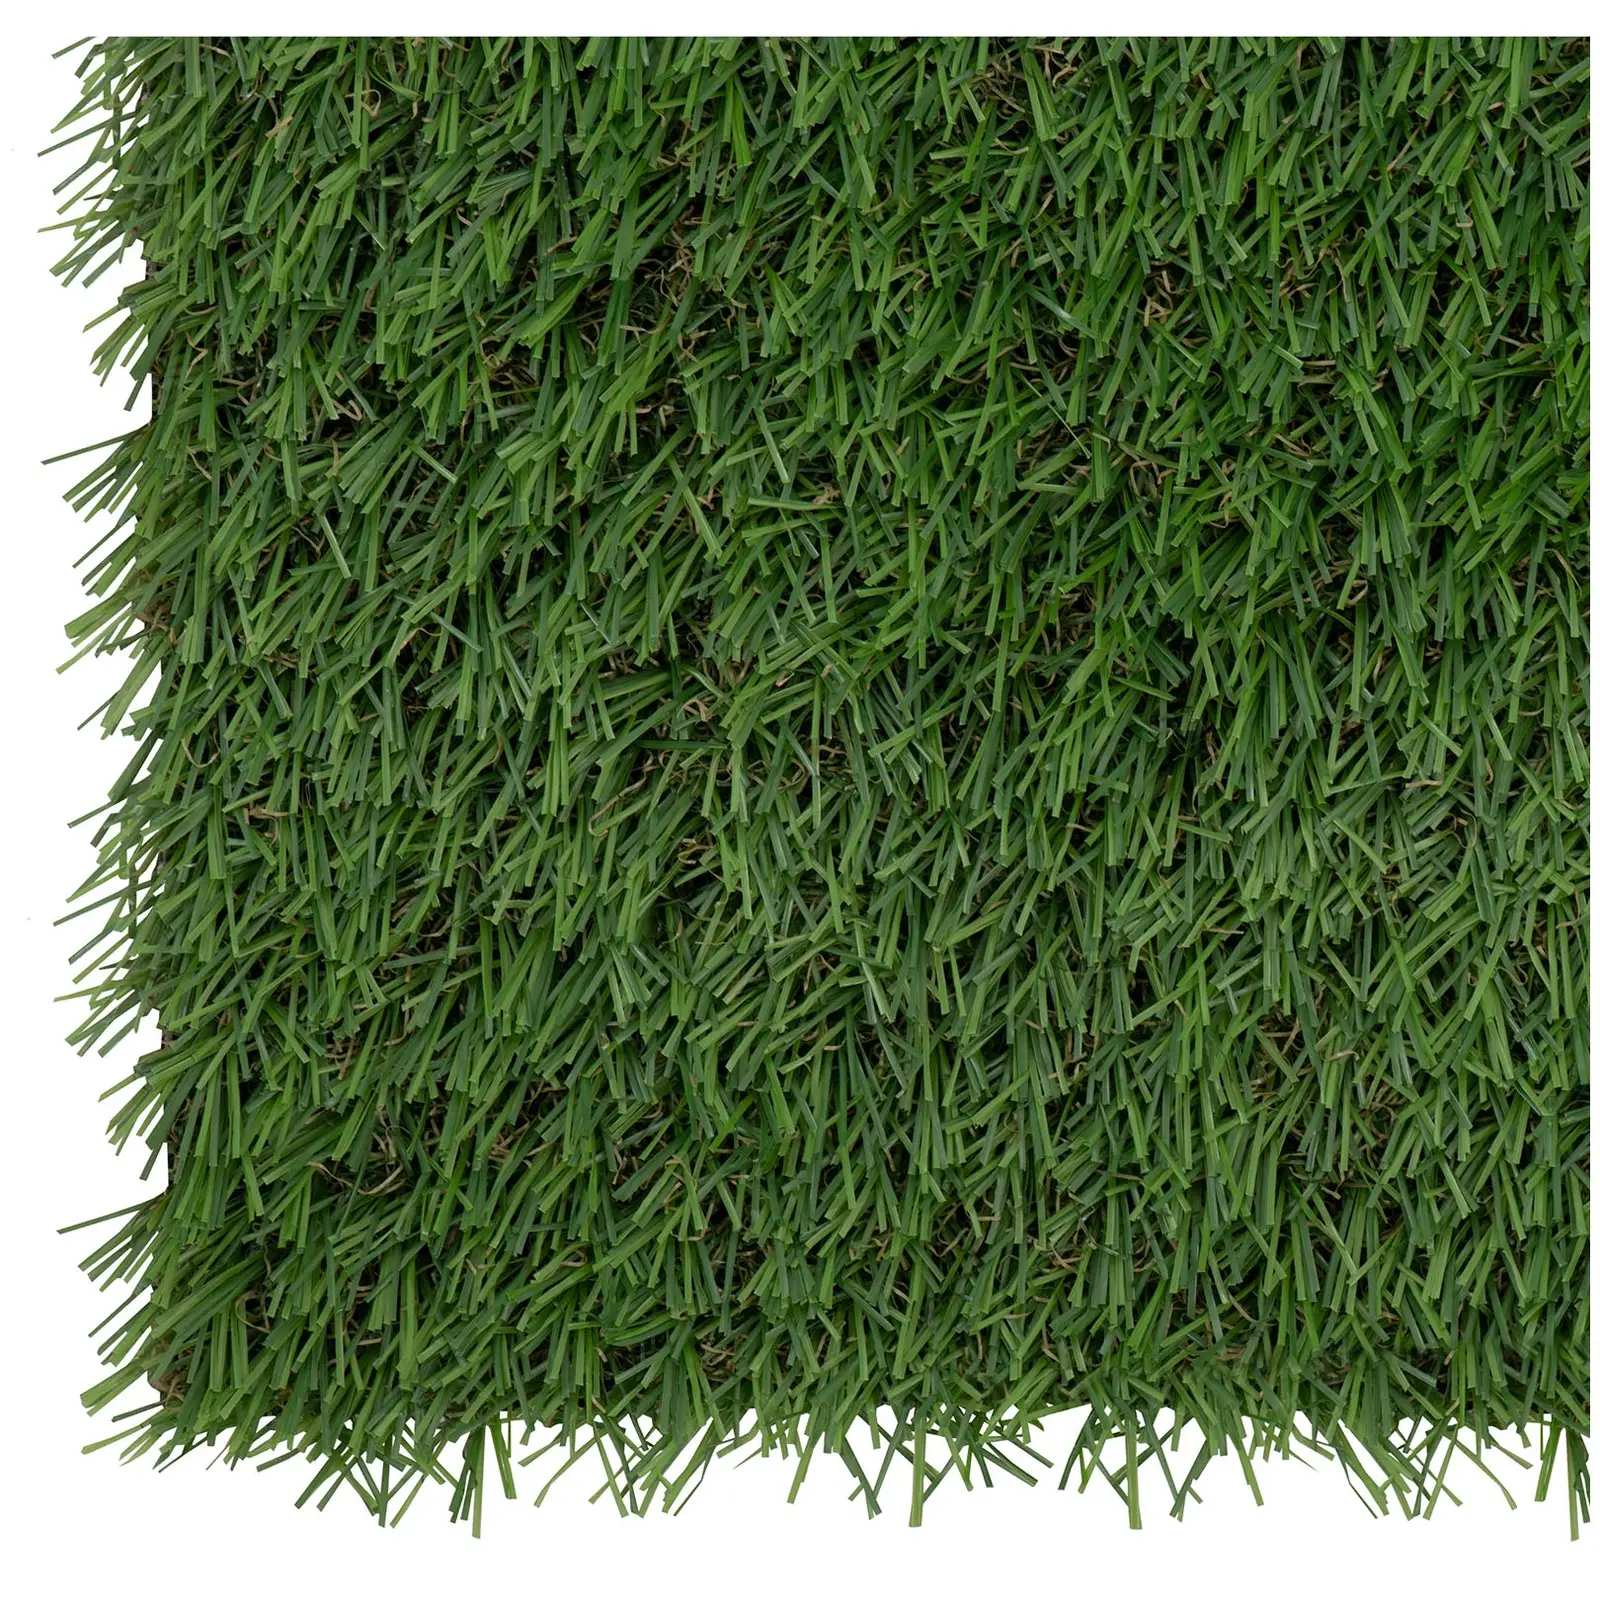 Artificial grass - 100 x 1000 cm - Height: 20 mm - Stitch rate: 13/10 cm - UV-resistant